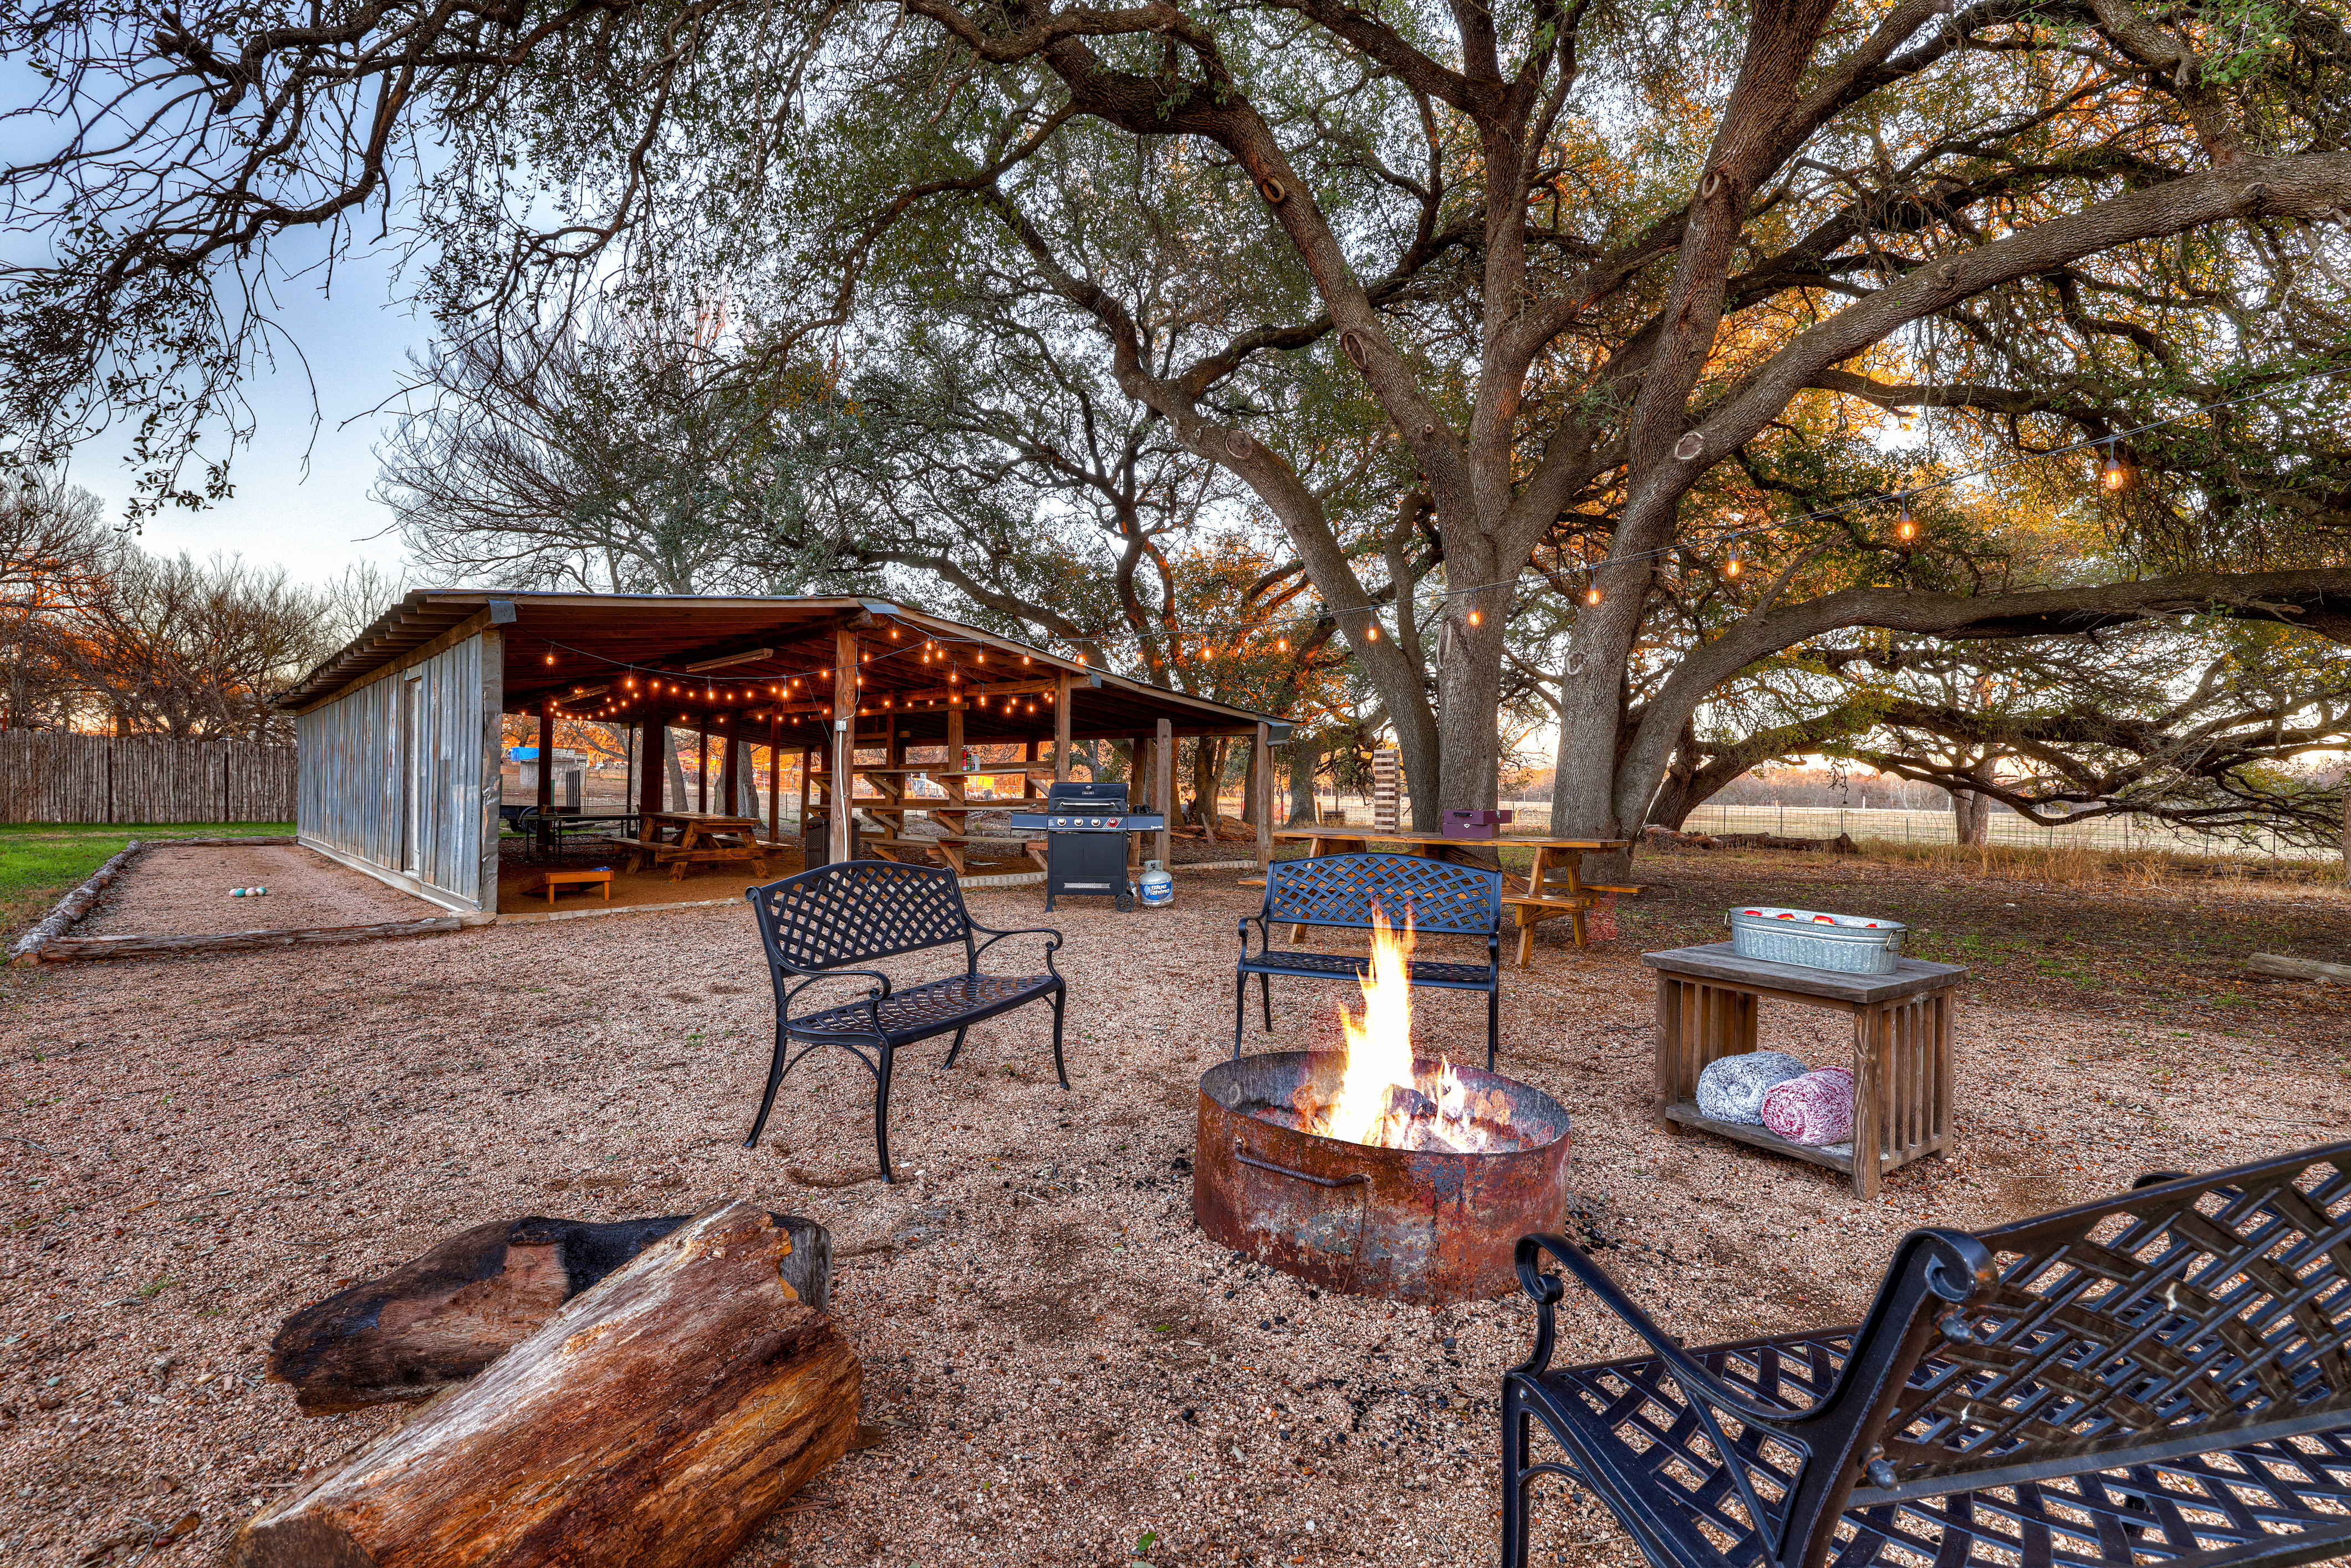 Gather around the firepit, play cornhole, and grill at the shared barn for endless outdoor fun.